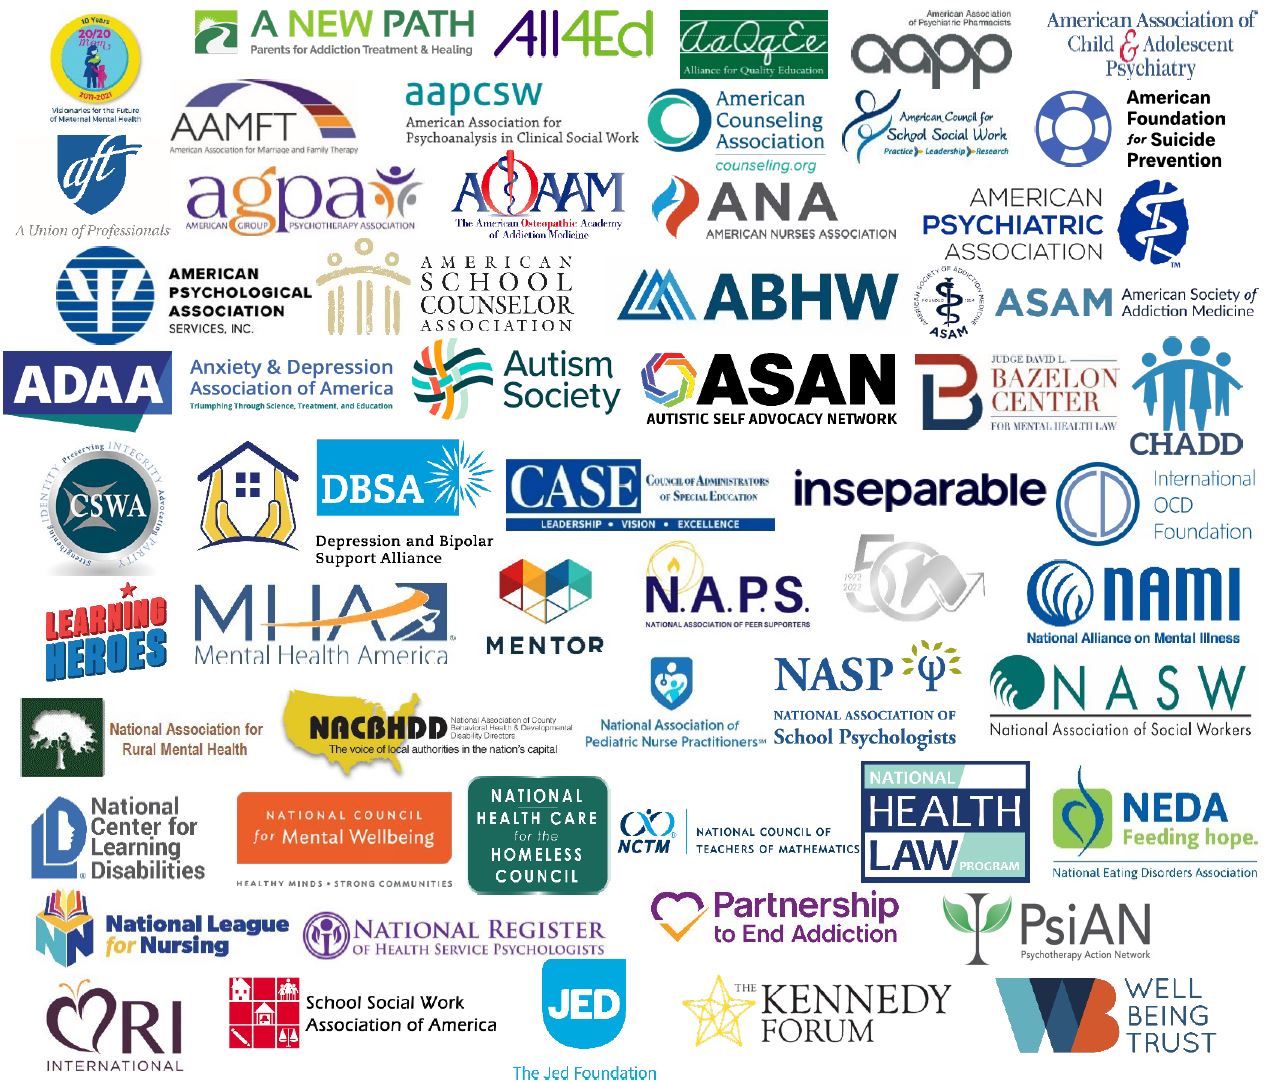 Logos of sixty organizations joining together in false and harmful attempts to link mental illness and gun violence